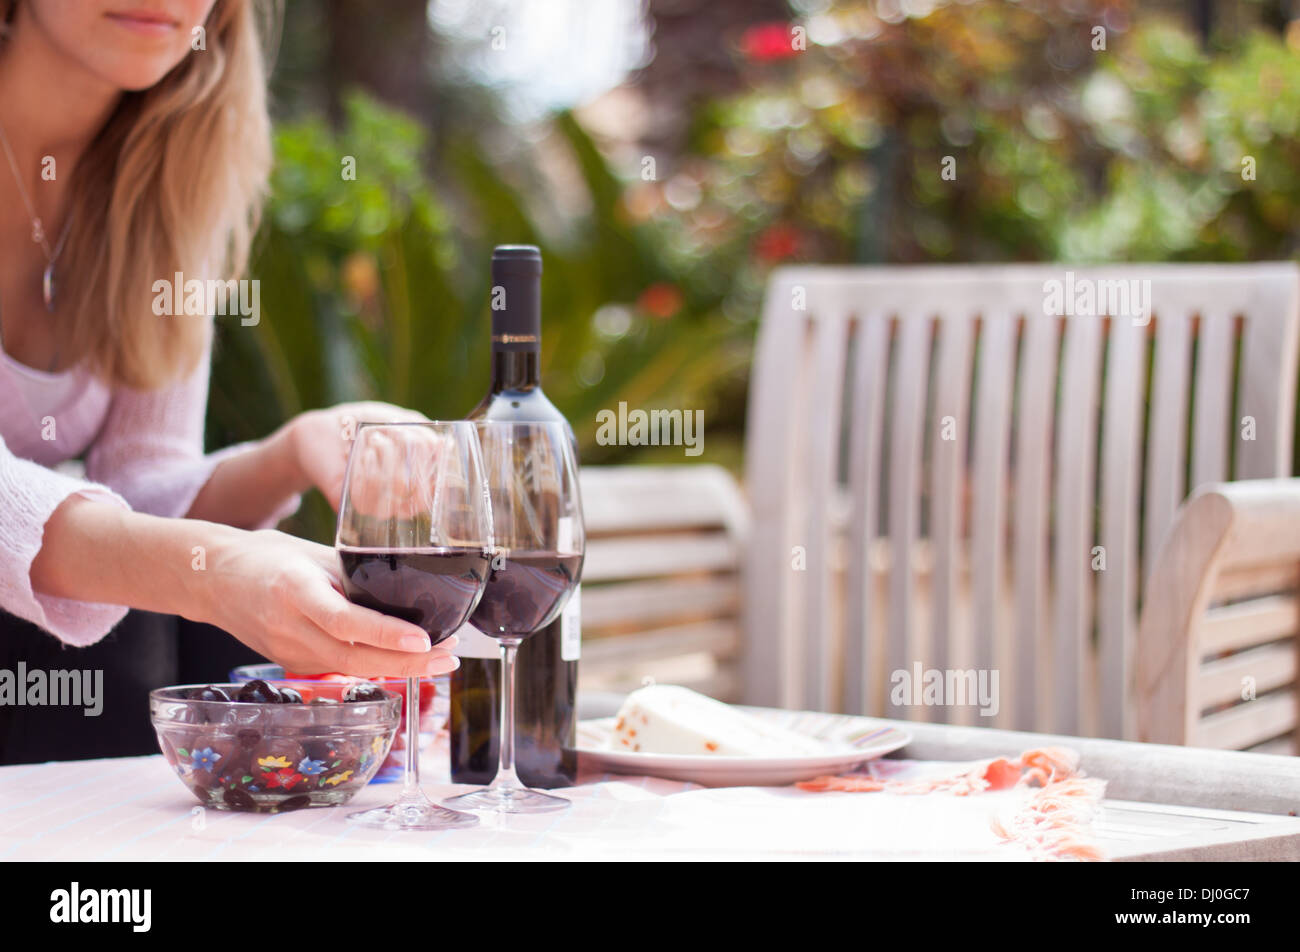 woman, outdoors, table, wine, glasses, bottle,  chair, drink, Stock Photo